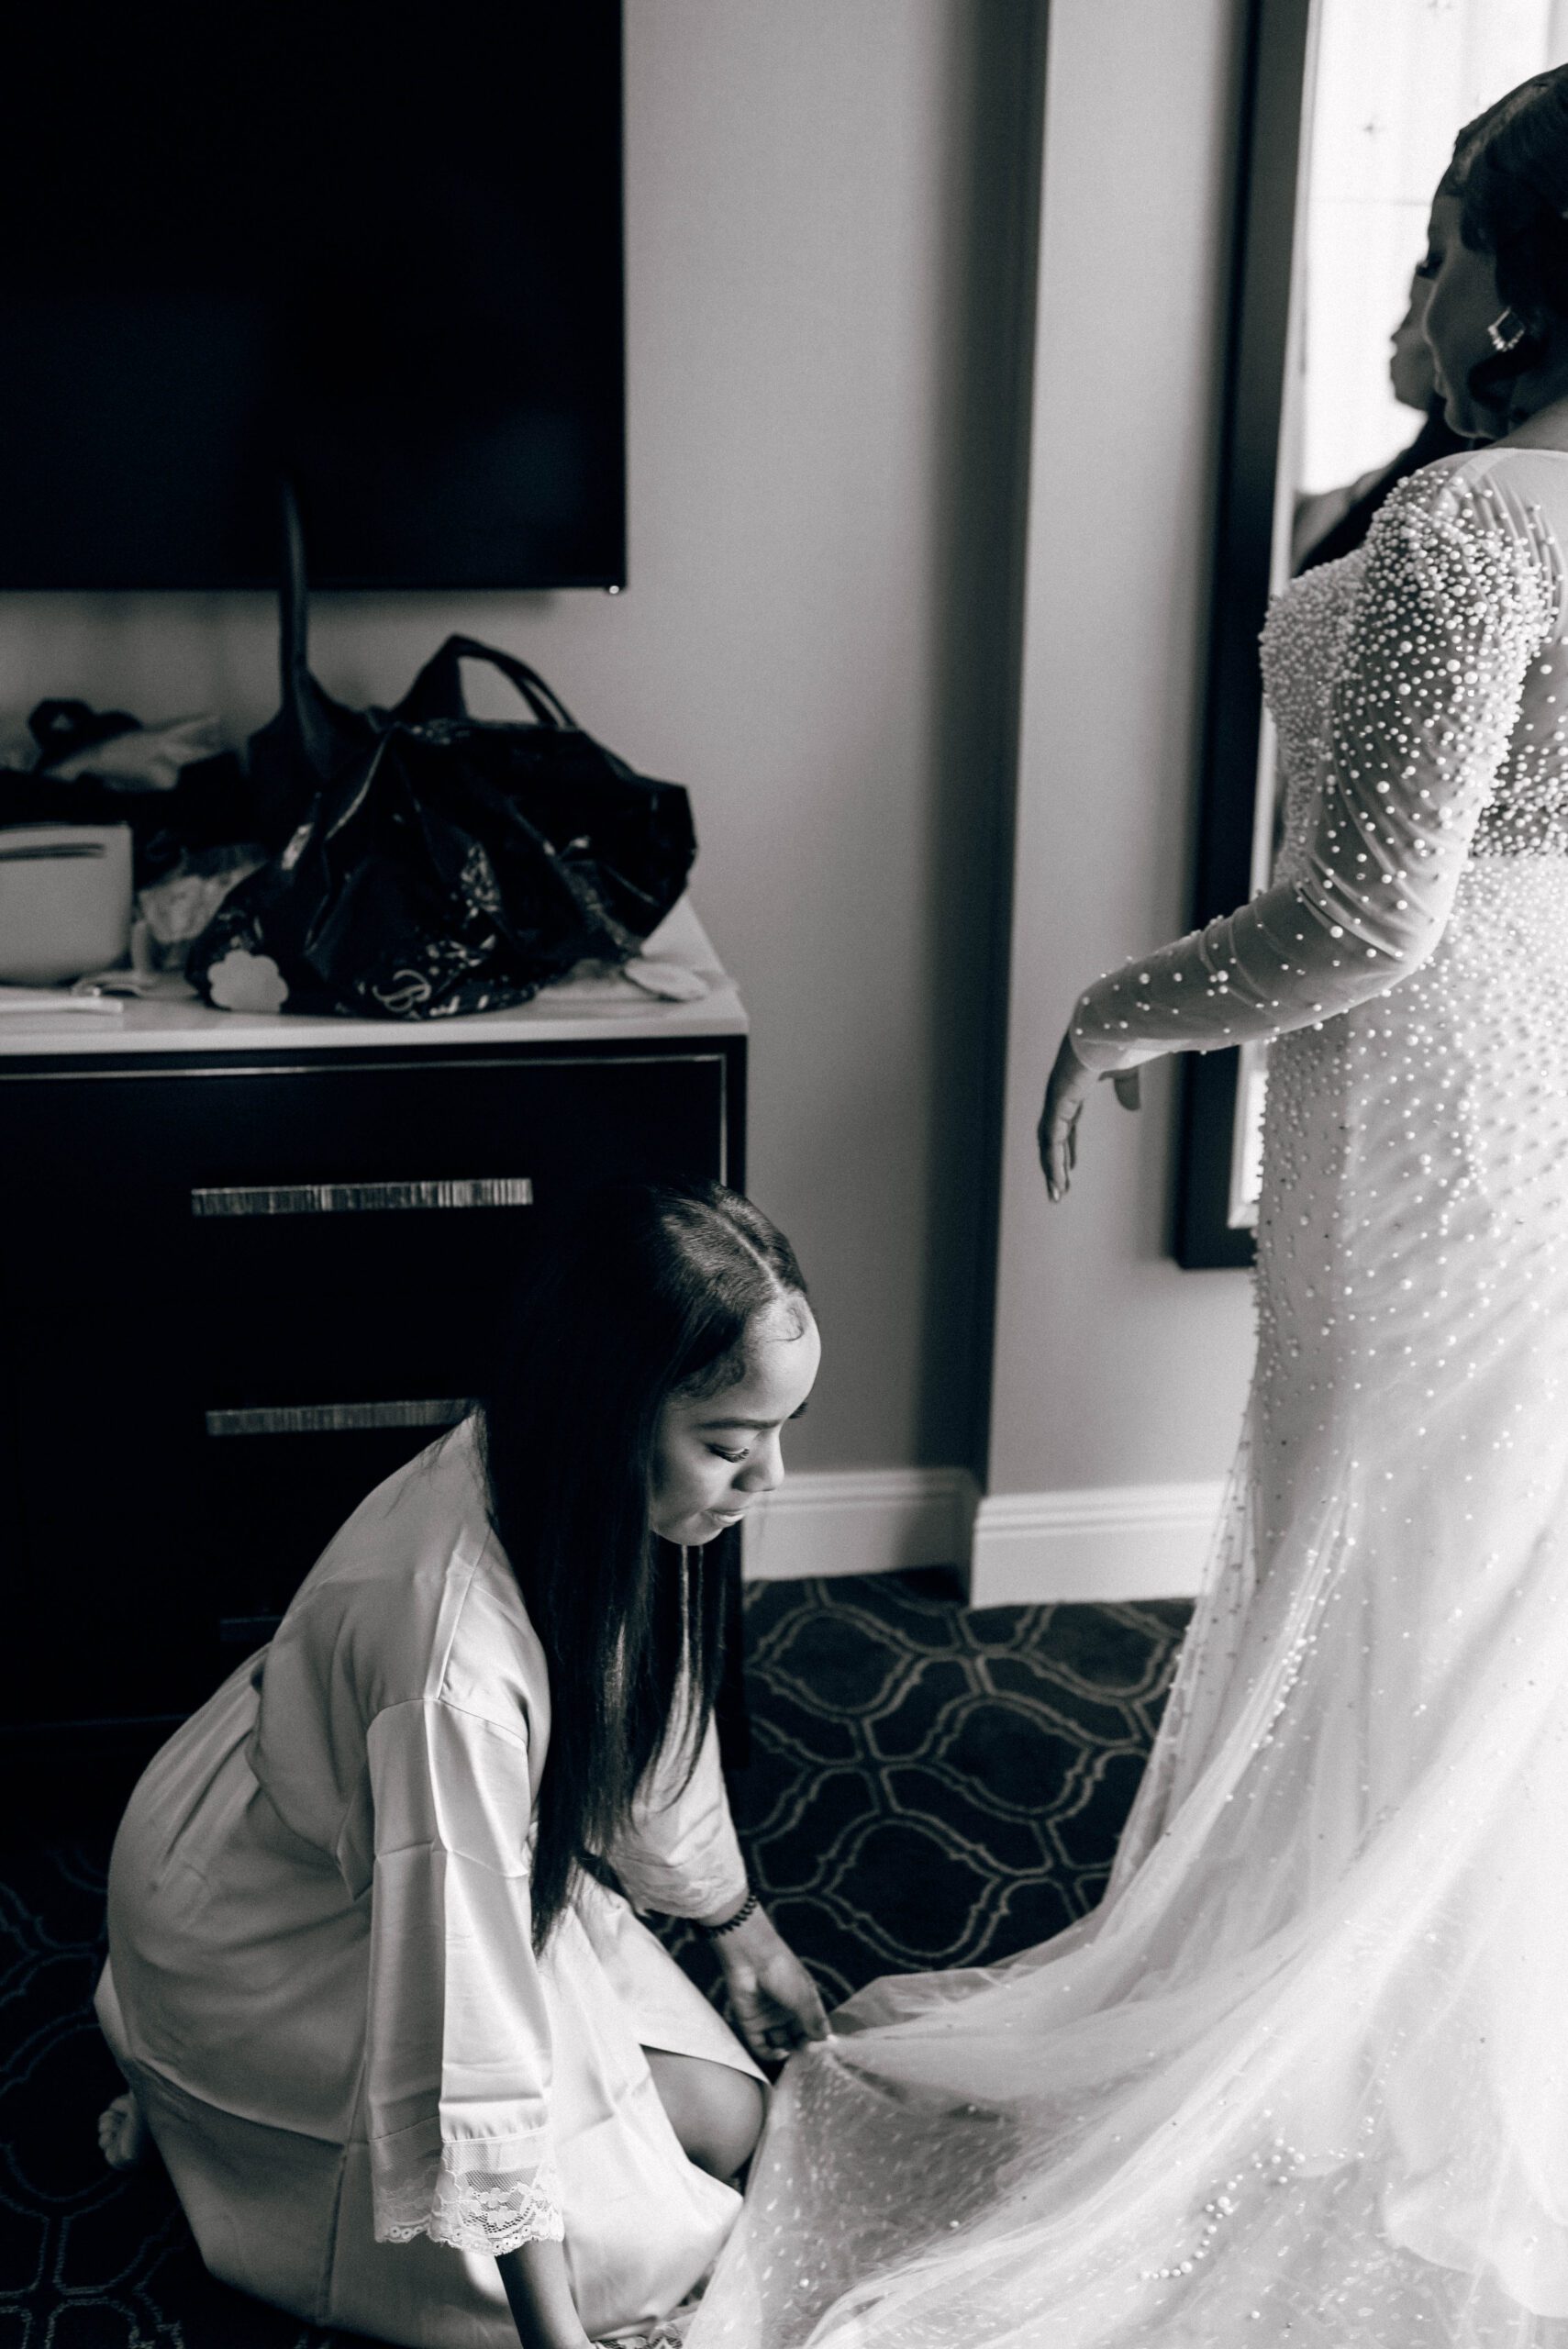 Bride getting ready with the help of her bridesmaids